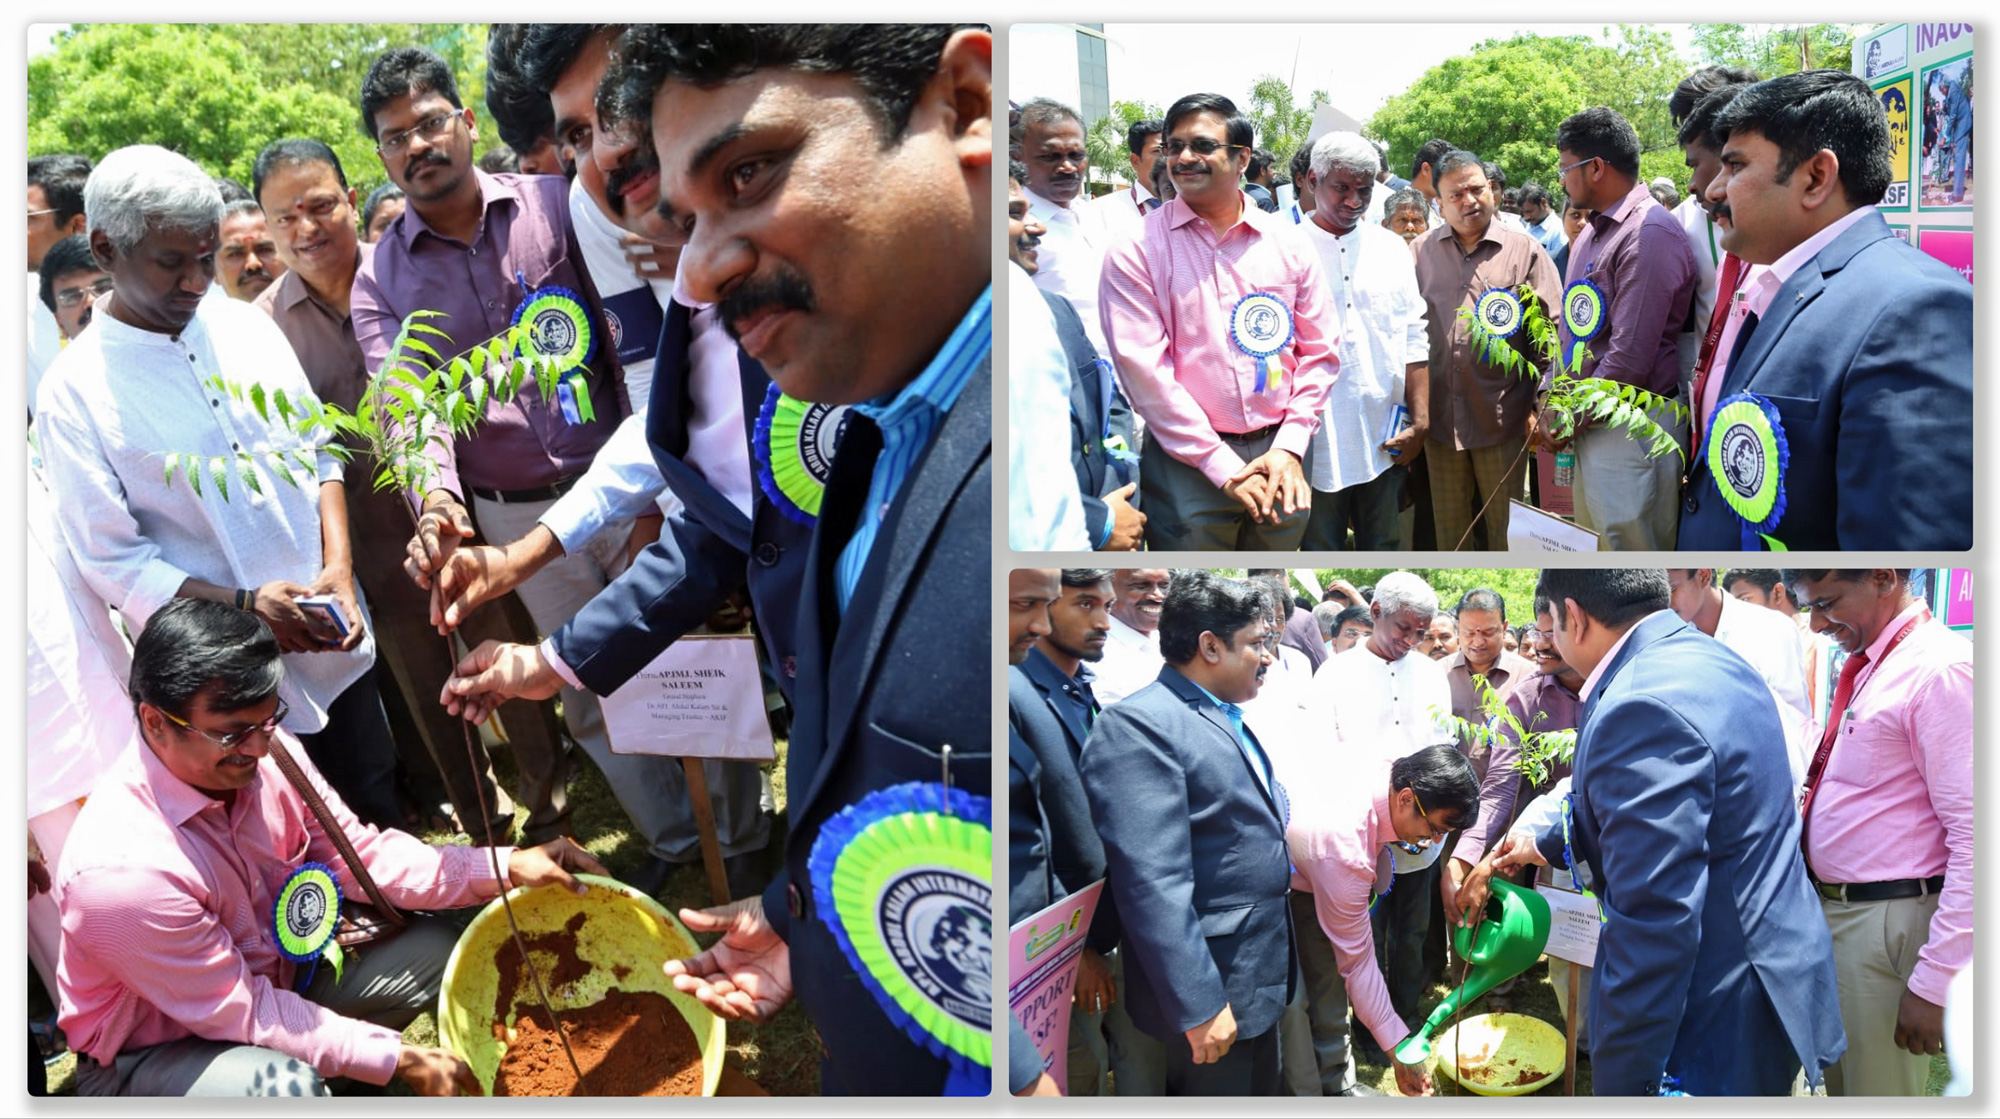 Happy to be planting a tree as part of the program along with Mr Karthik Raja and other dignitaries